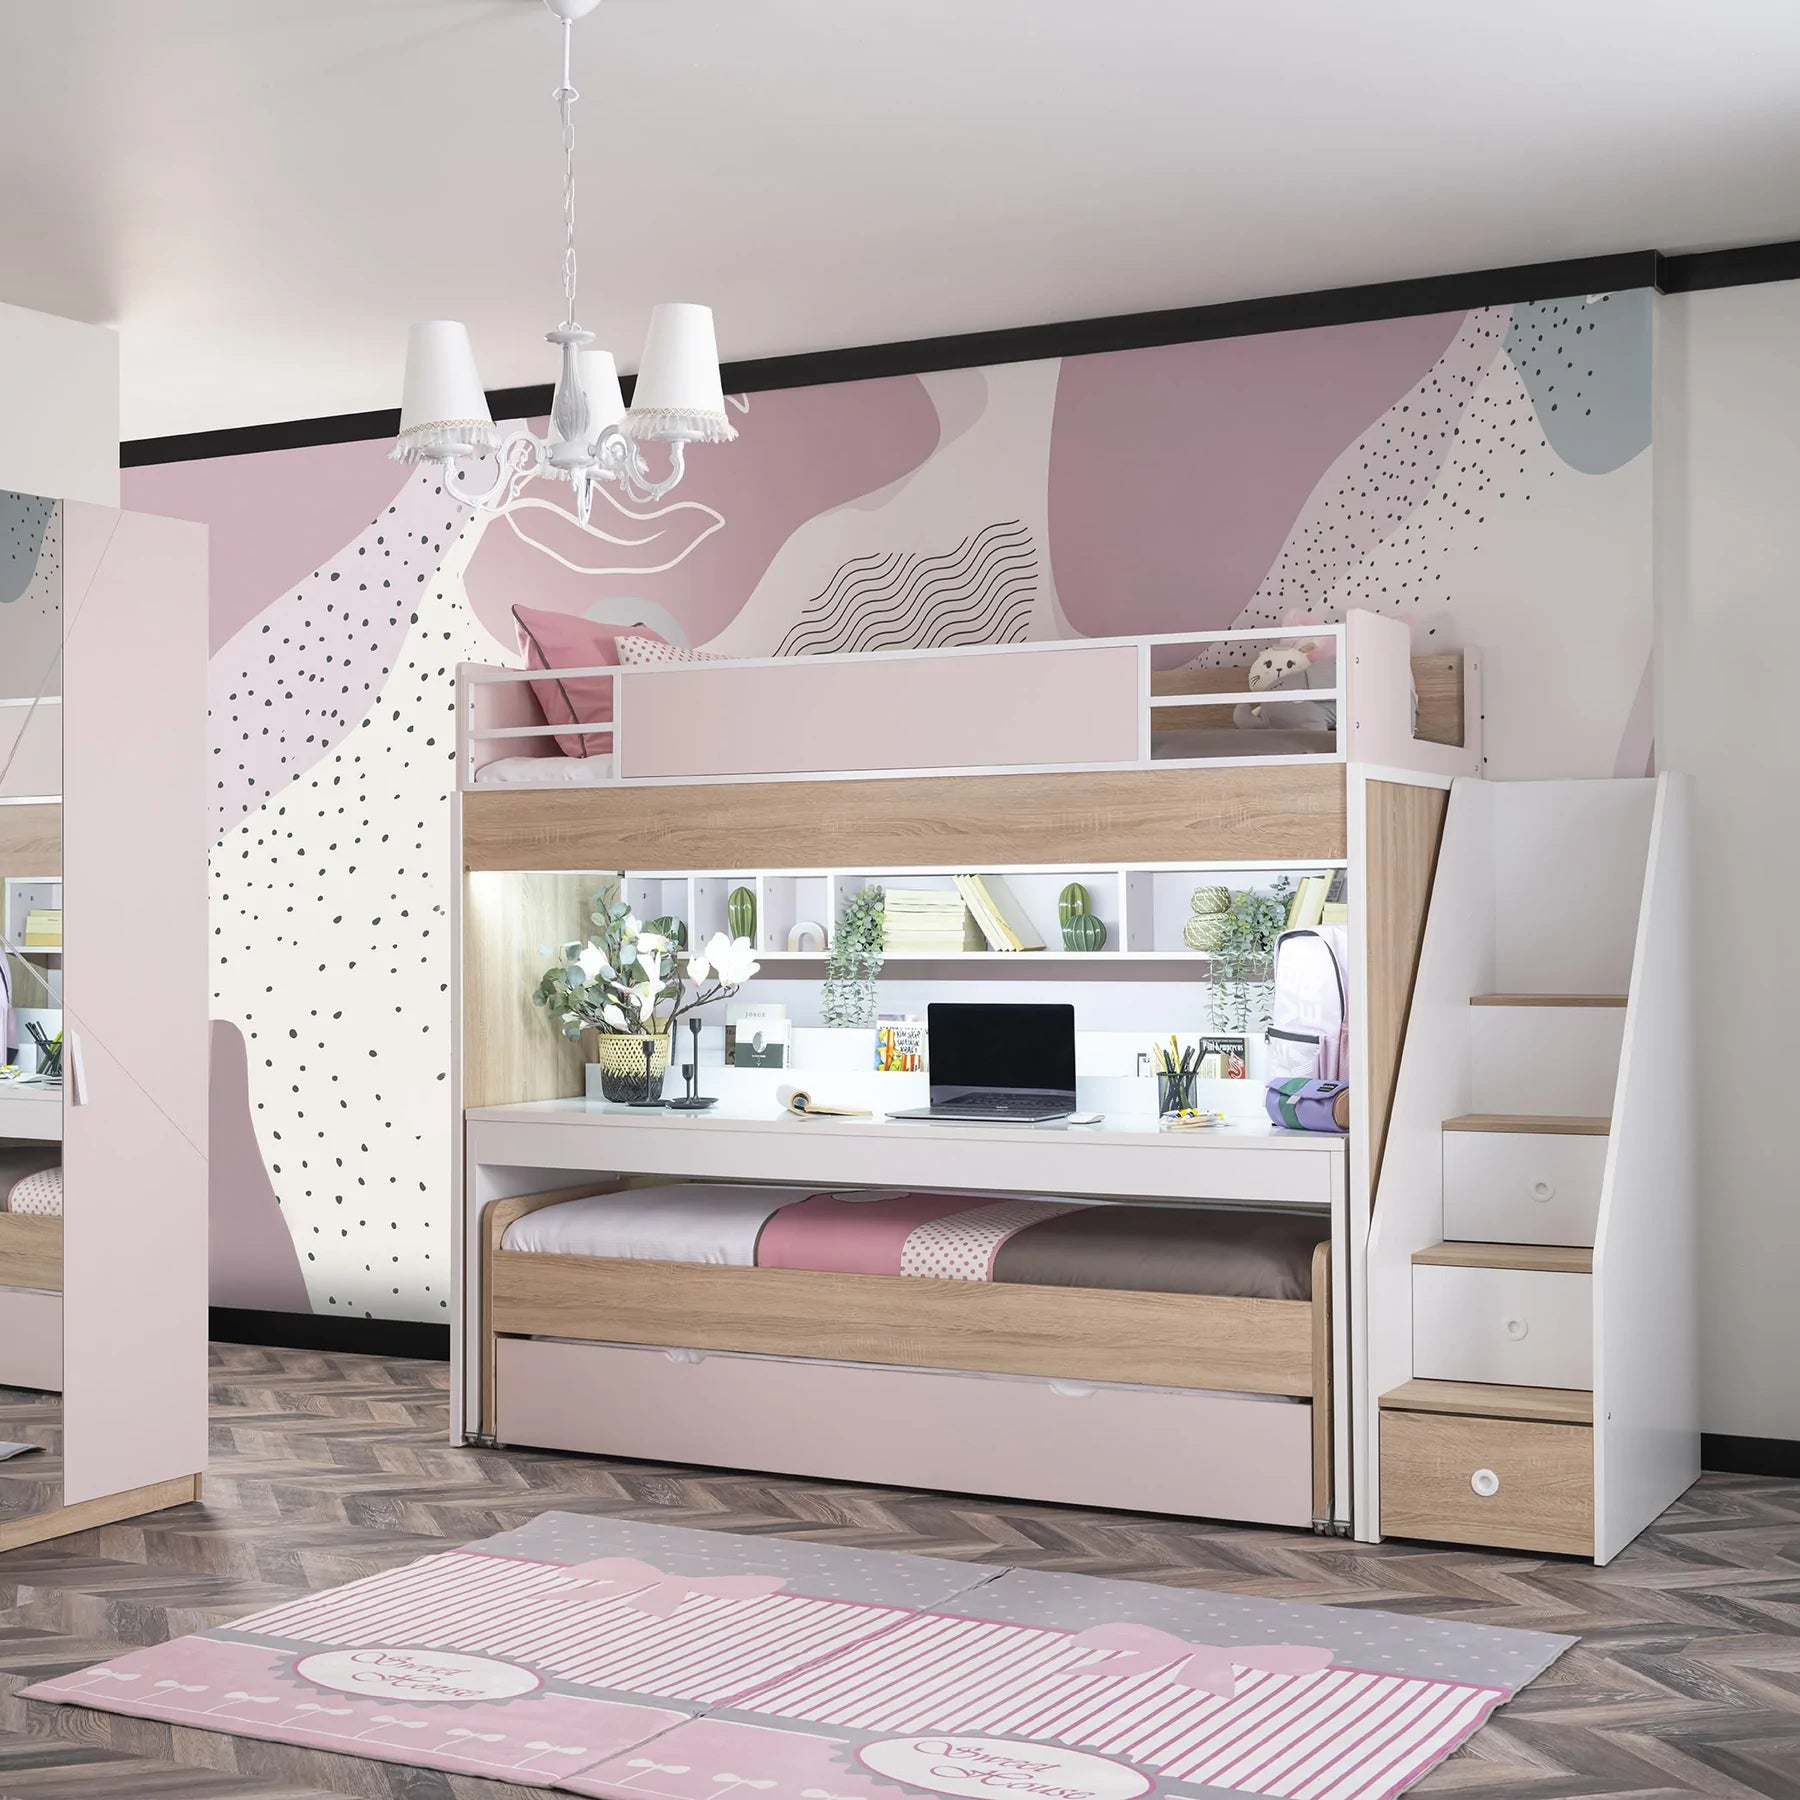 NEW CITY BUNK BEDS FOR GIRLS WITH DESK SET - Zoomie Beds